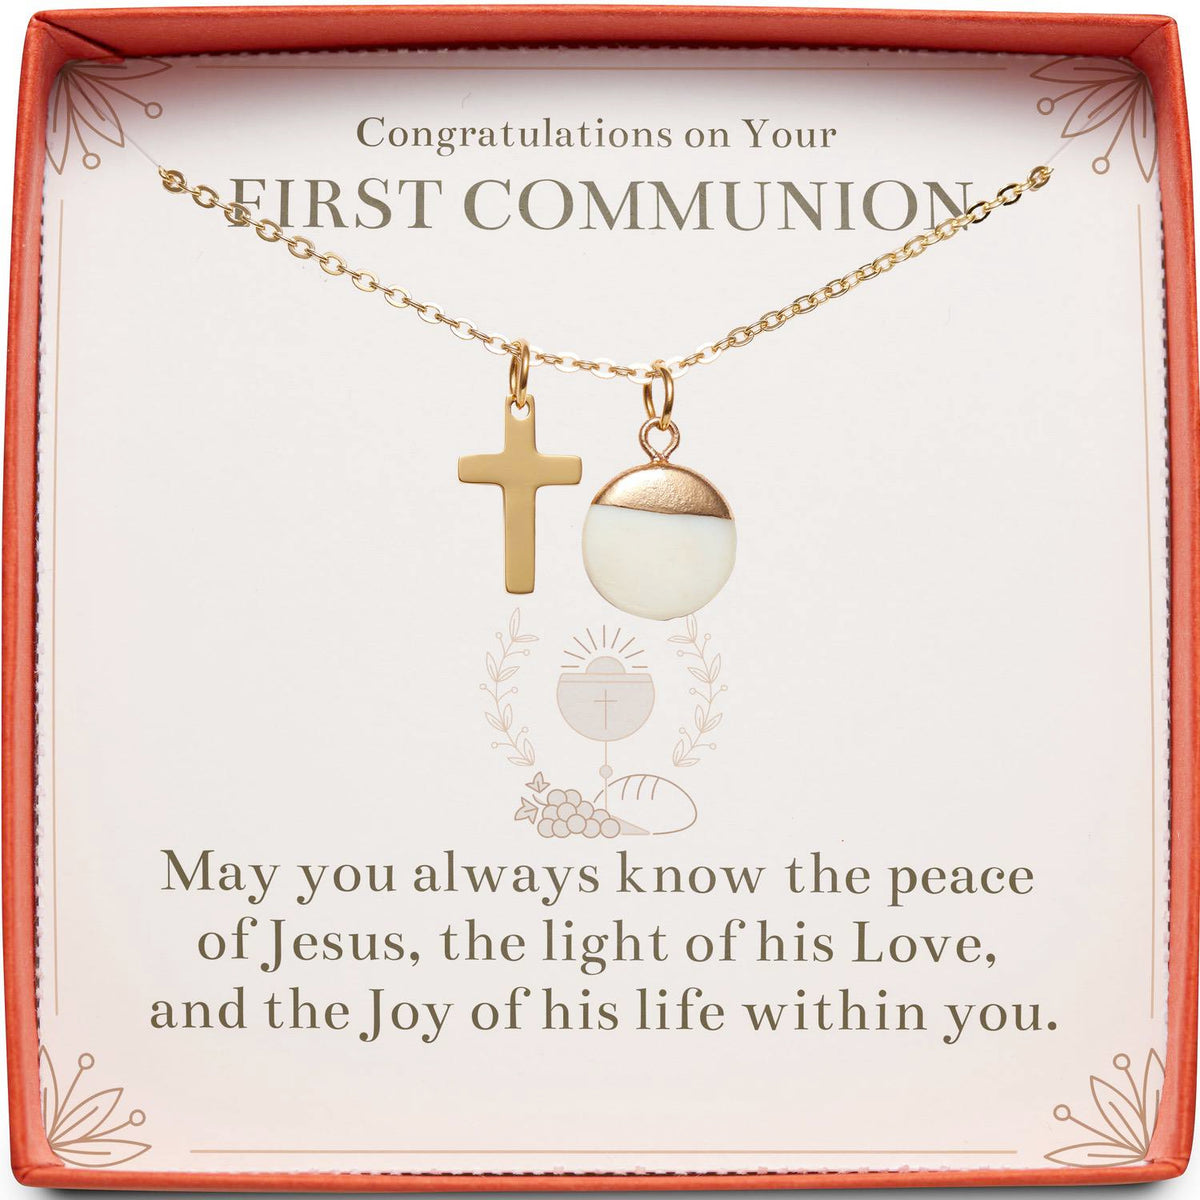 Congratulations on Your First Communion | Peace of Jesus | Cross Necklace